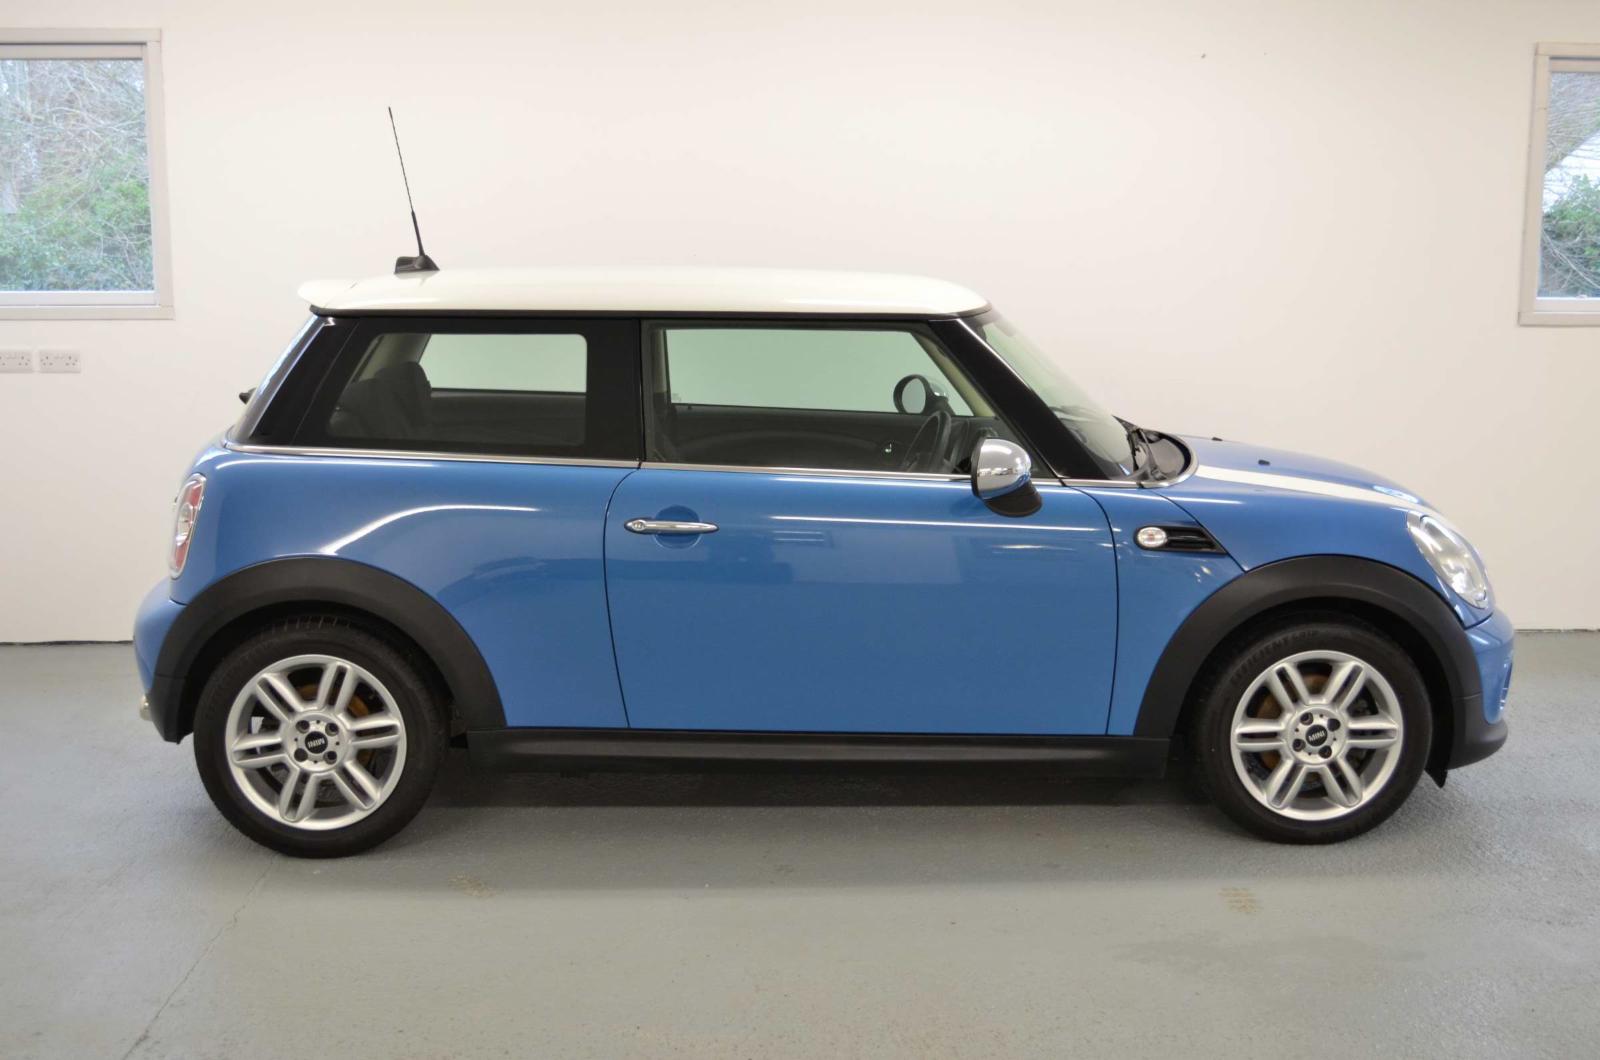 BMW Mini Cooper D Hatchback (Chili Pack) for sale | Castle Classic Cars